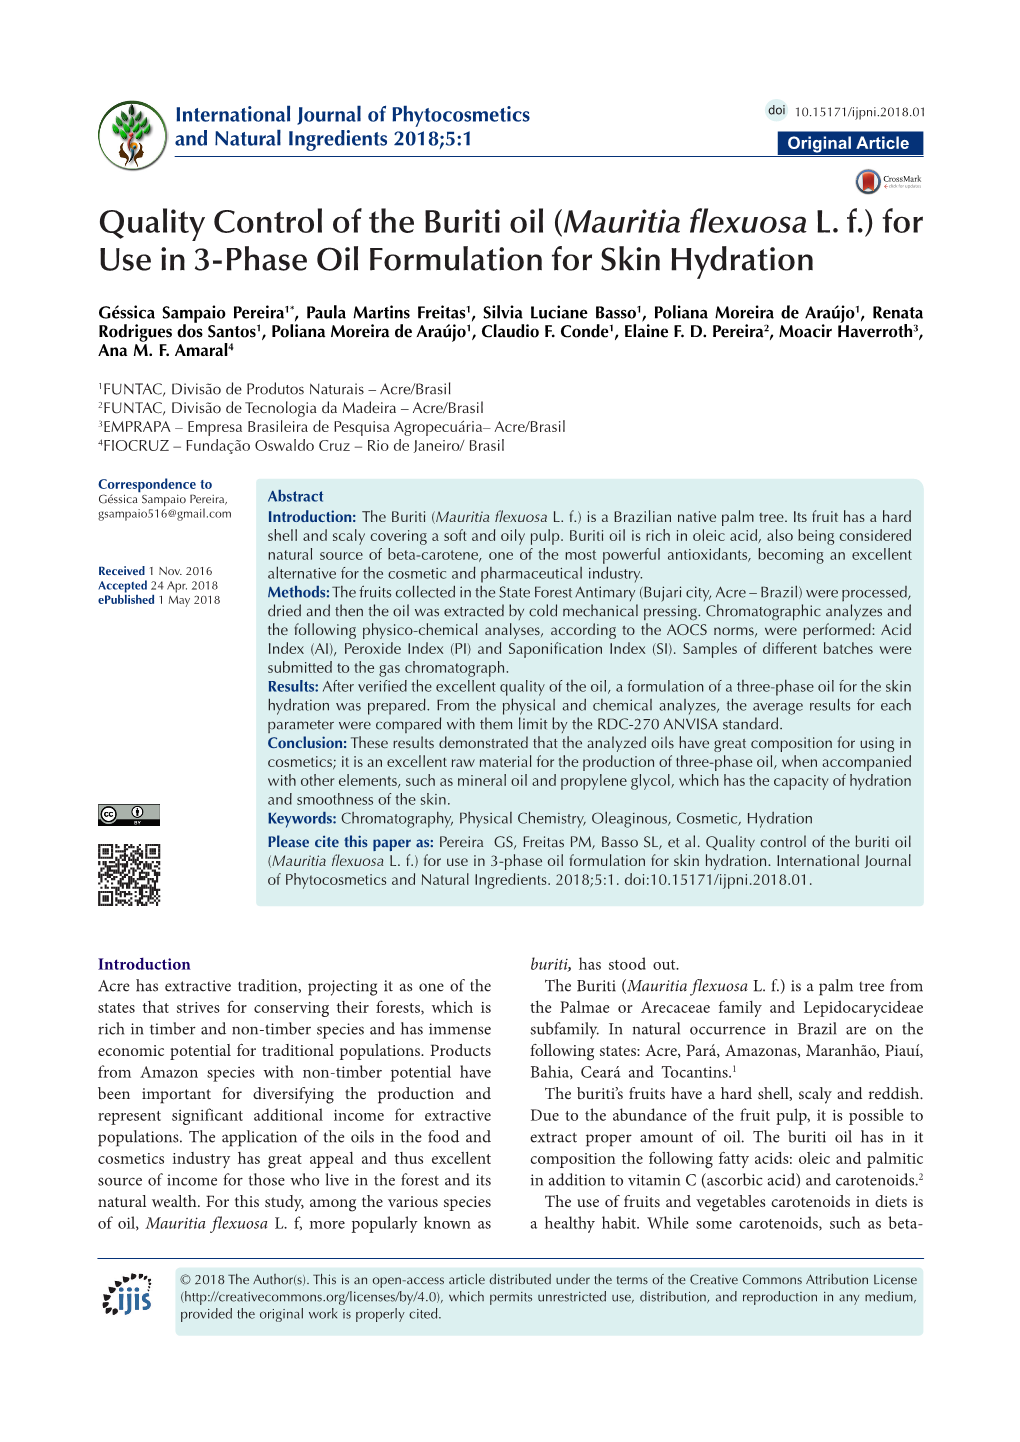 Quality Control of the Buriti Oil (Mauritia Flexuosa L. F.) for Use in 3-Phase Oil Formulation for Skin Hydration